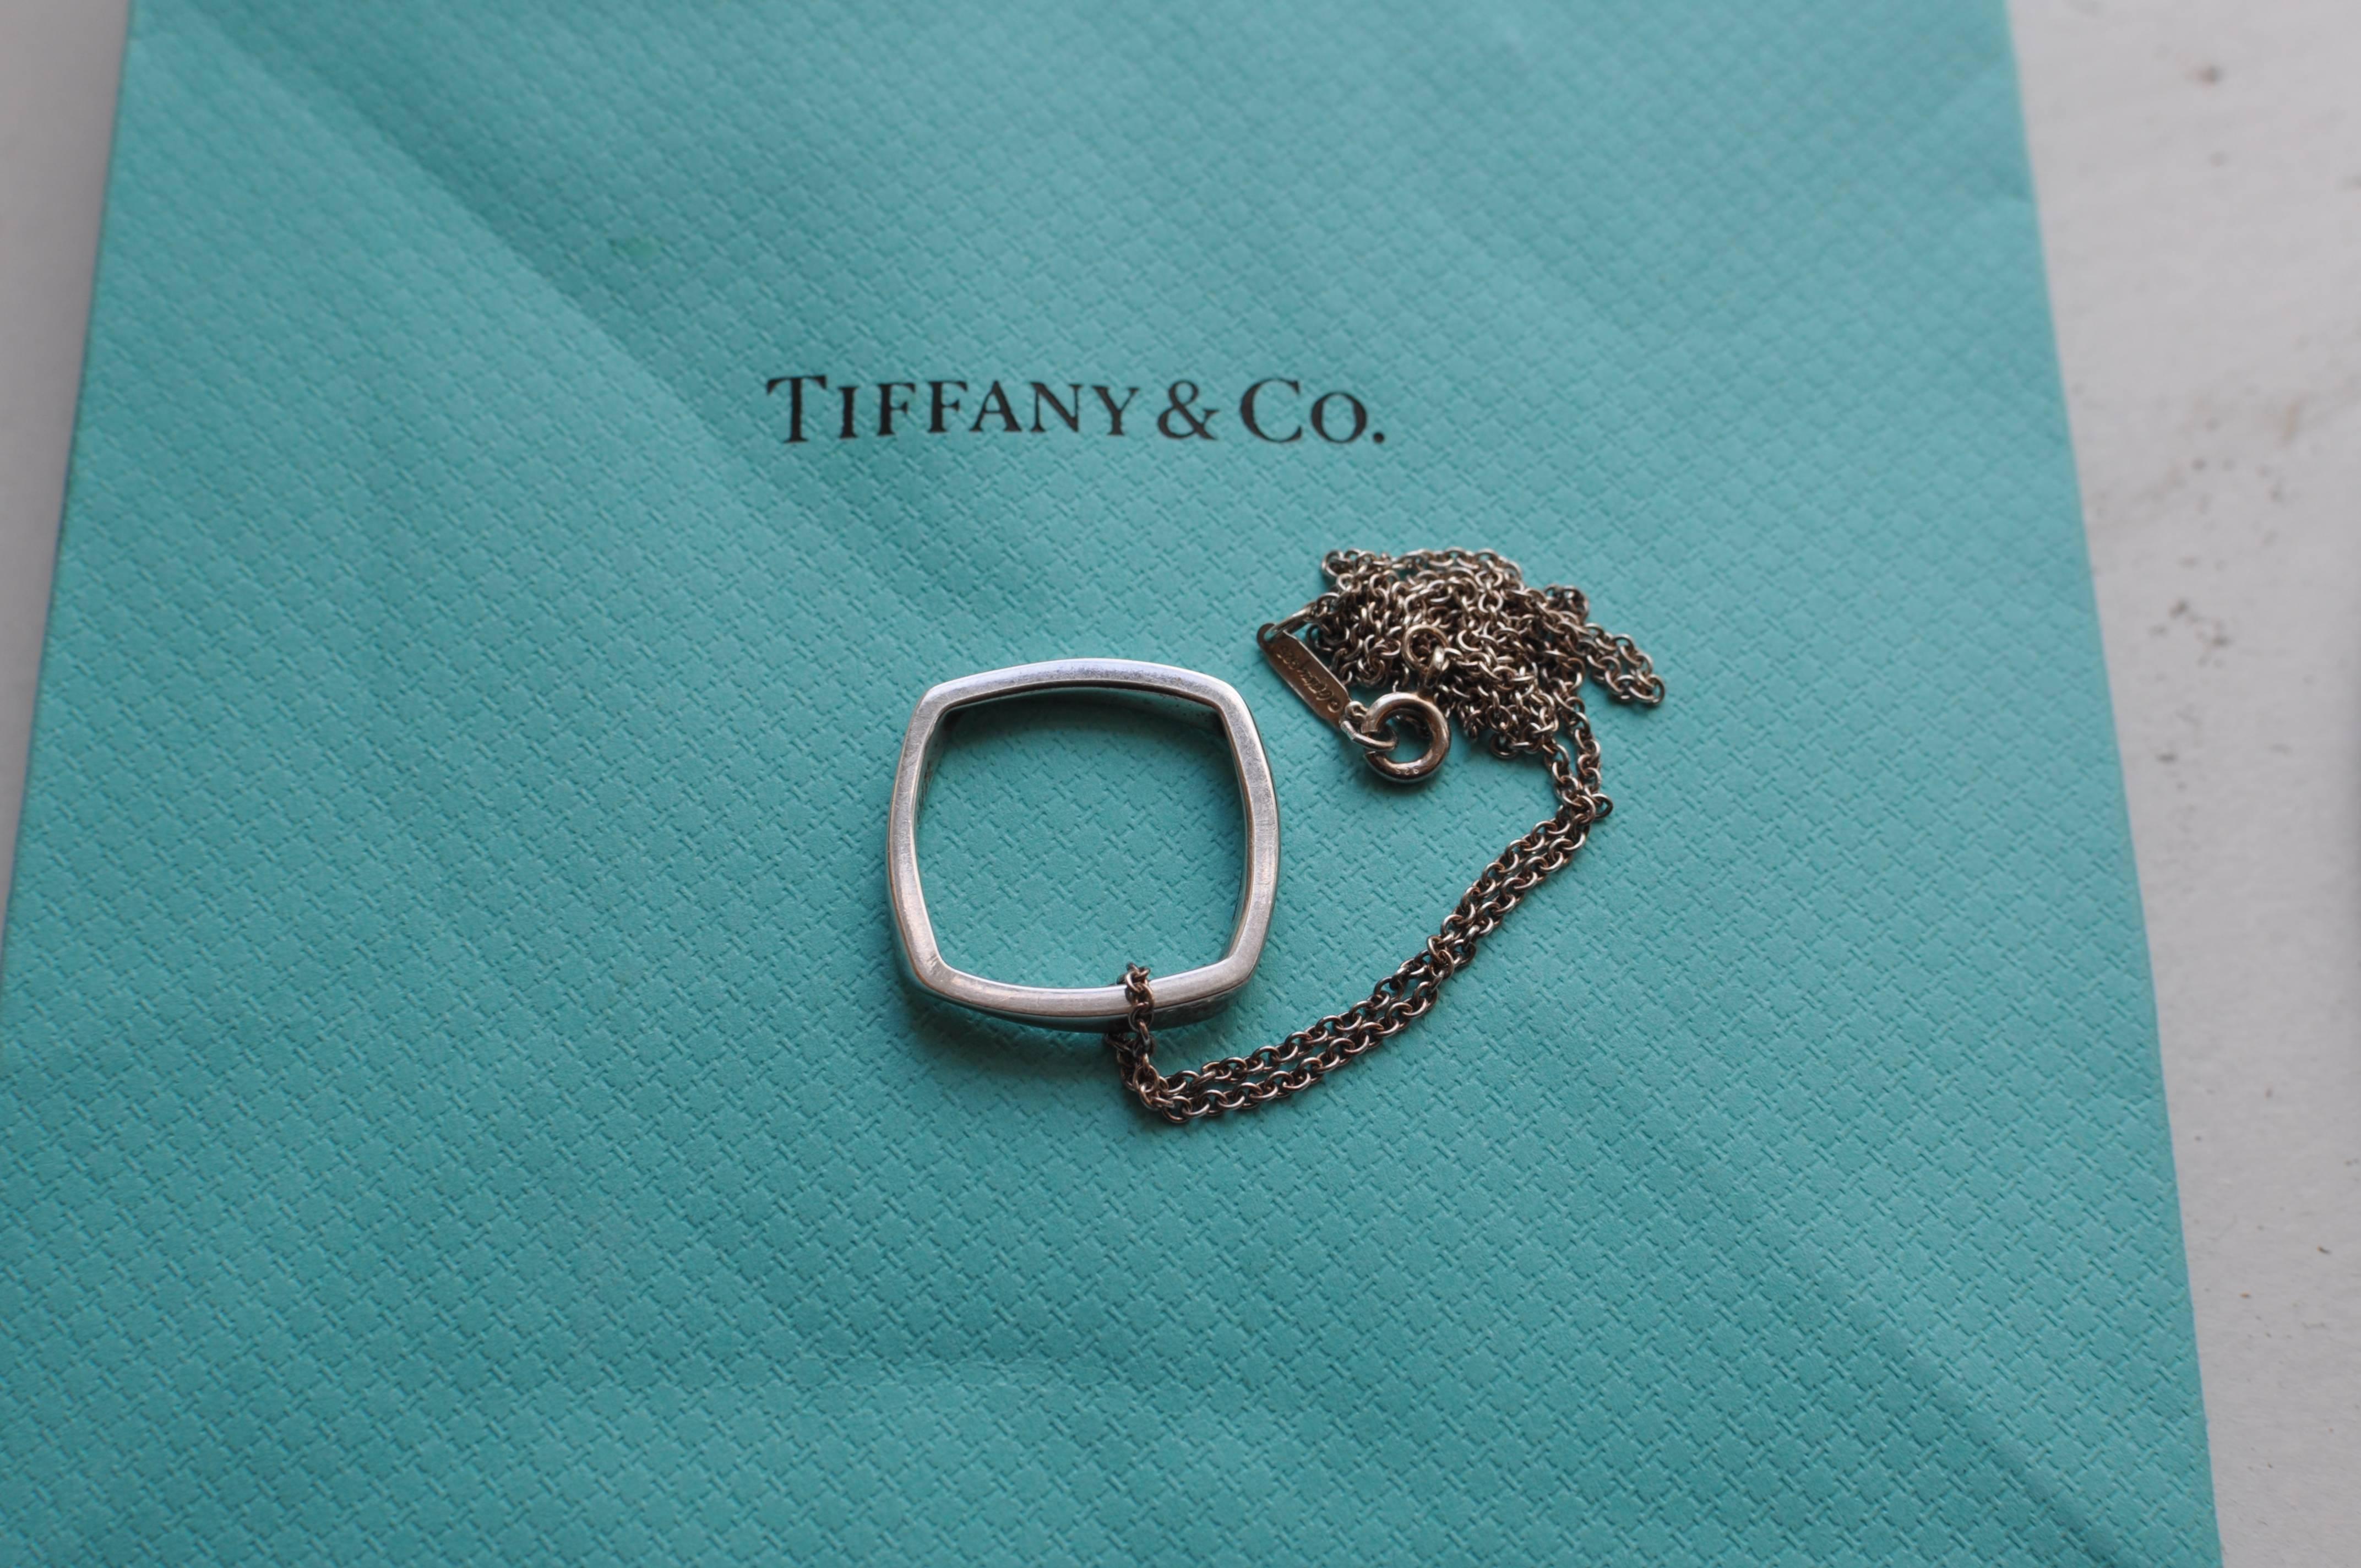 This is the Frank Gehry Torque pendant made for Tiffany & Co. The pendant has an inscription but also carries the Tiffany & Co. (c) Gehry 925. The chain is silver and the clasp marked with Tiffany & Co.